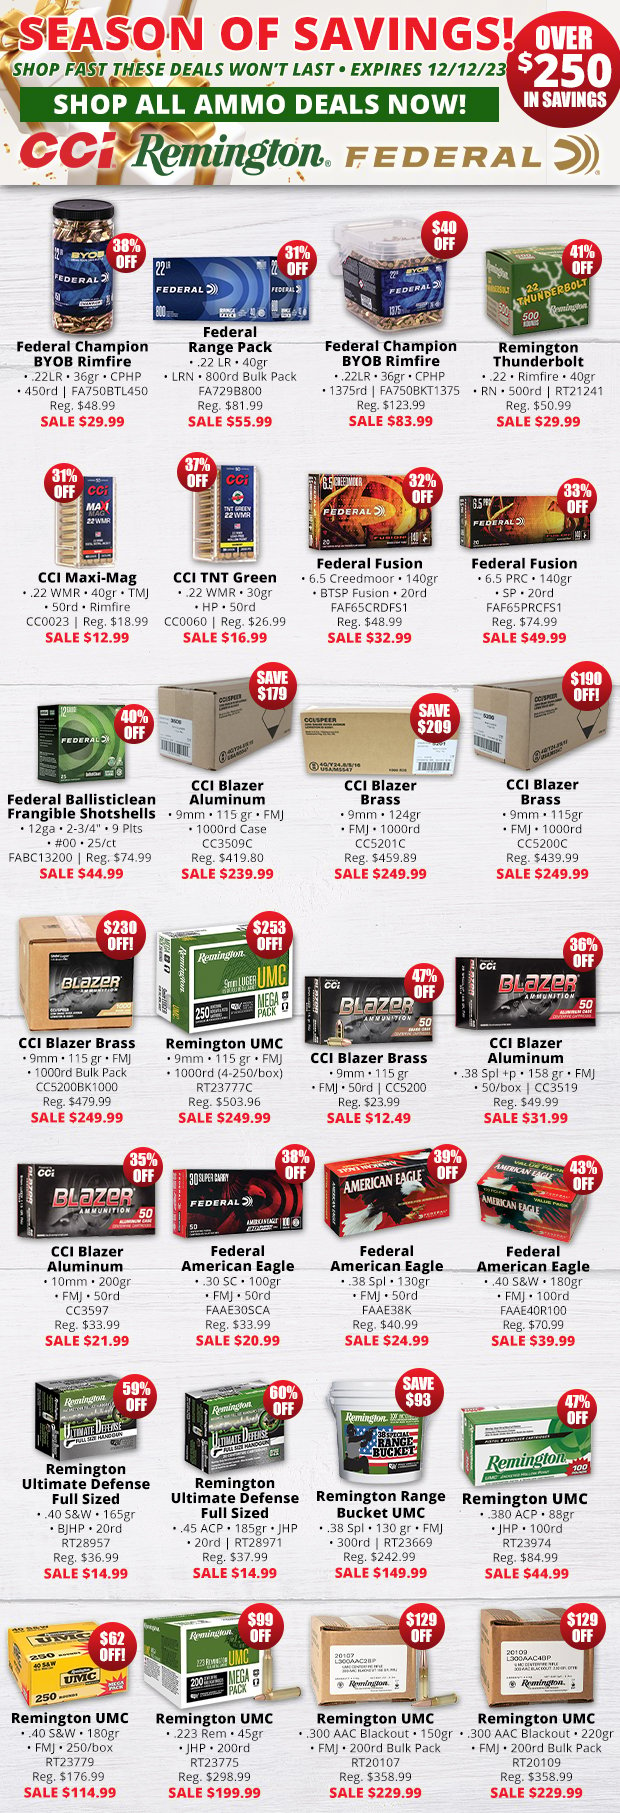 Over $250 in Savings On Top Ammo Deals